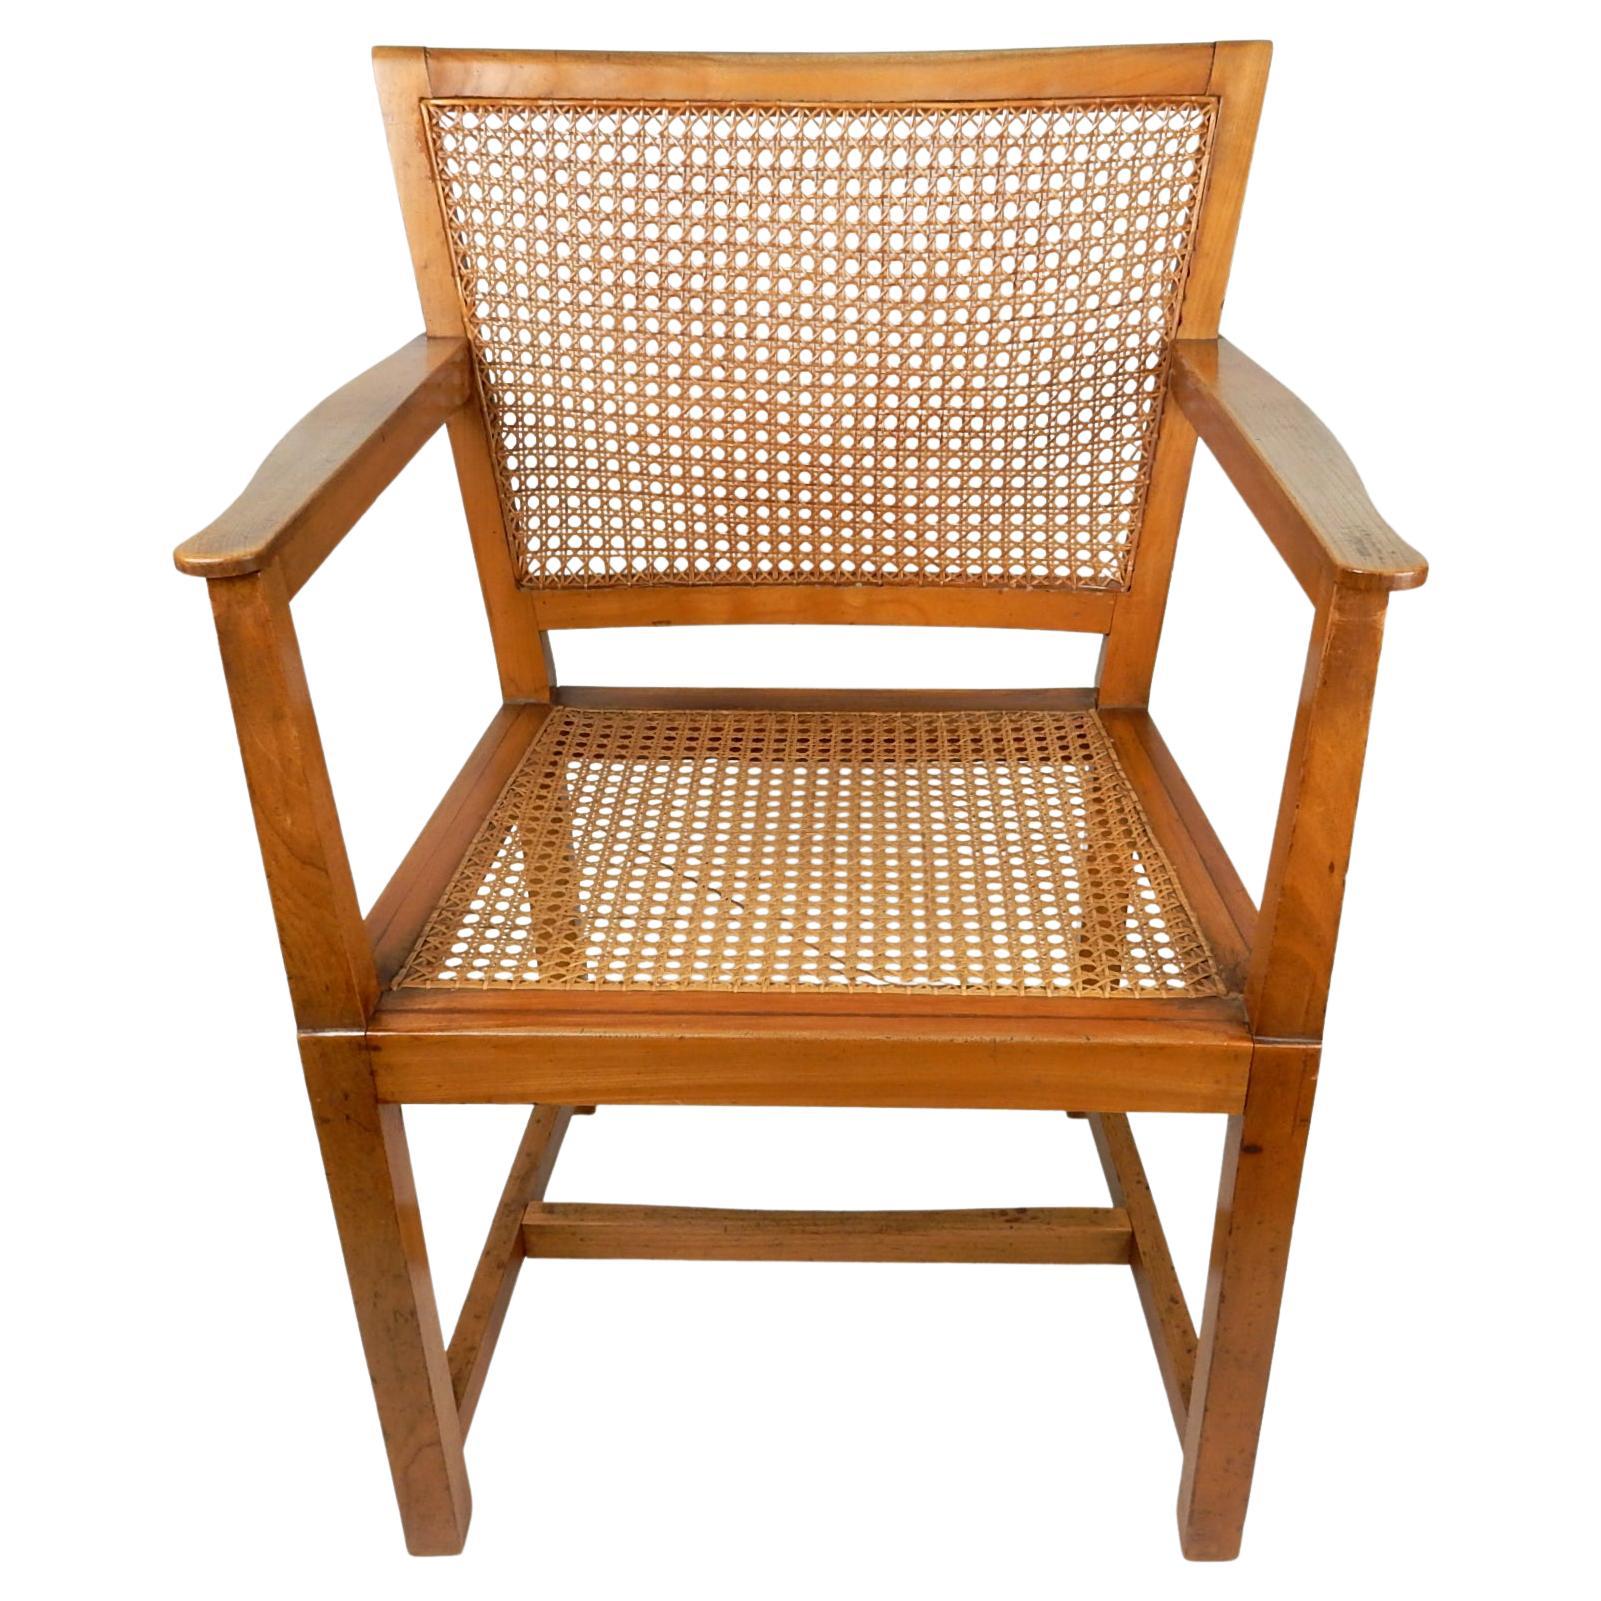 Architect Oskar Strnad 1879-1935 Pine & Cane Arm Chair 1920's Art Deco In Good Condition For Sale In Las Vegas, NV